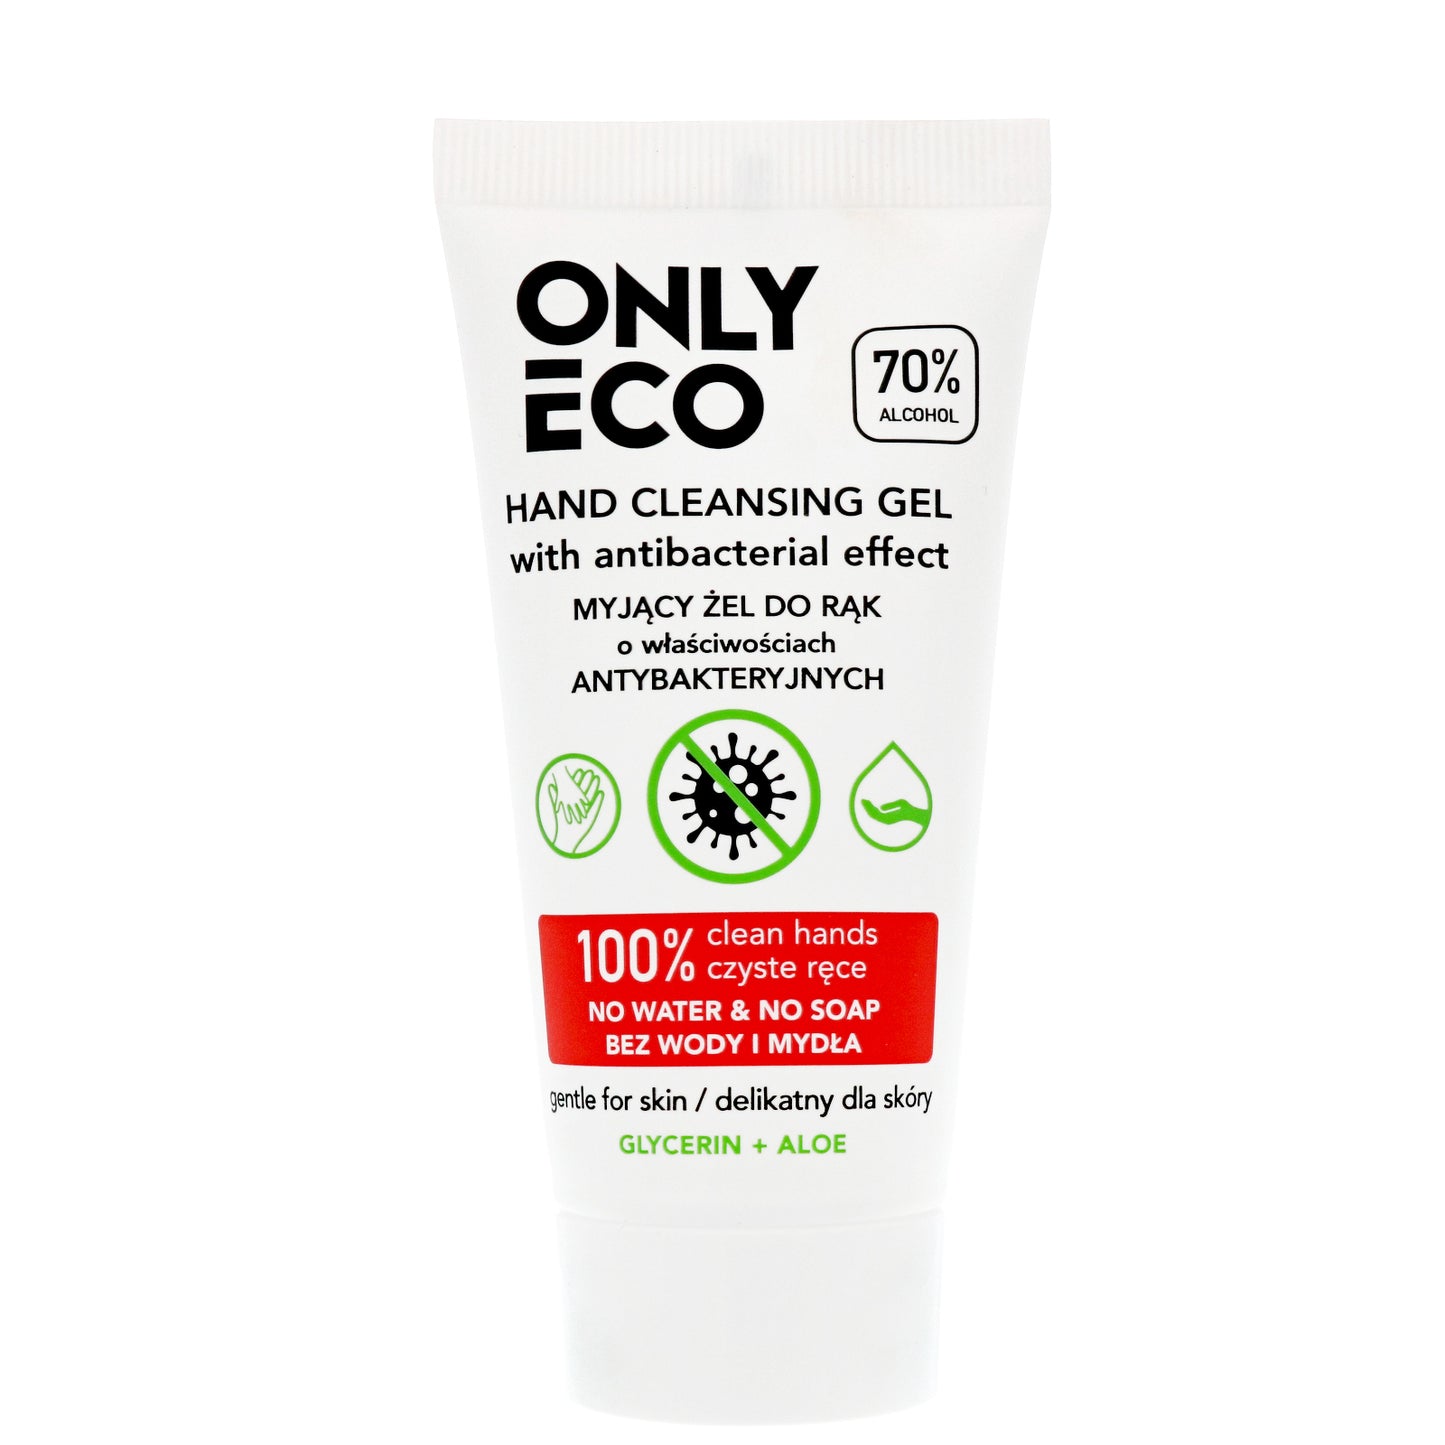 ONLY ECO Hand Cleansing Gel 70% Alcohol 50ml